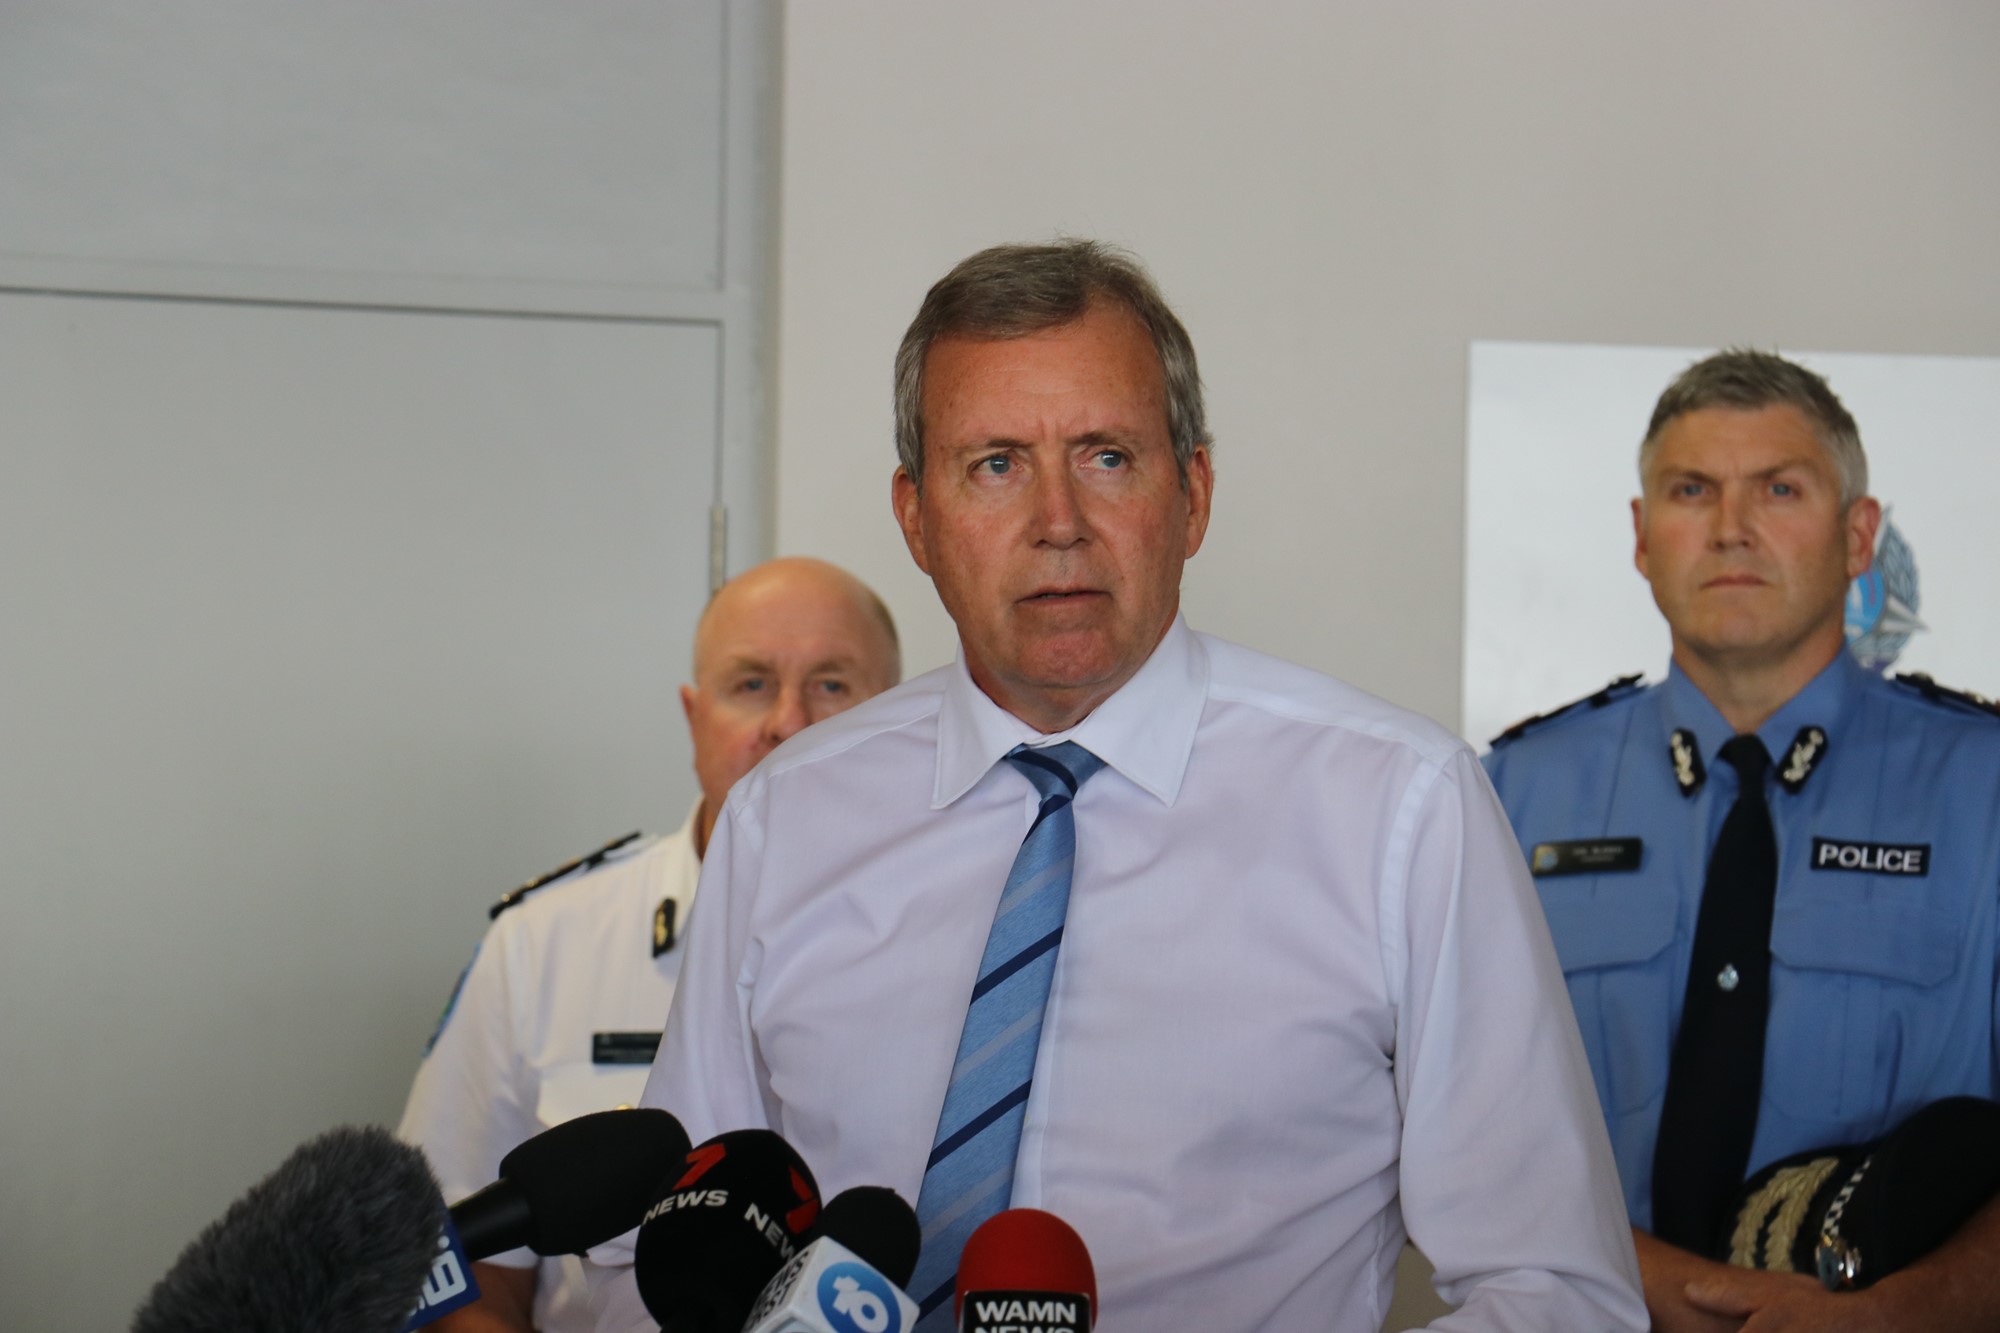 Three men stand at a press conference